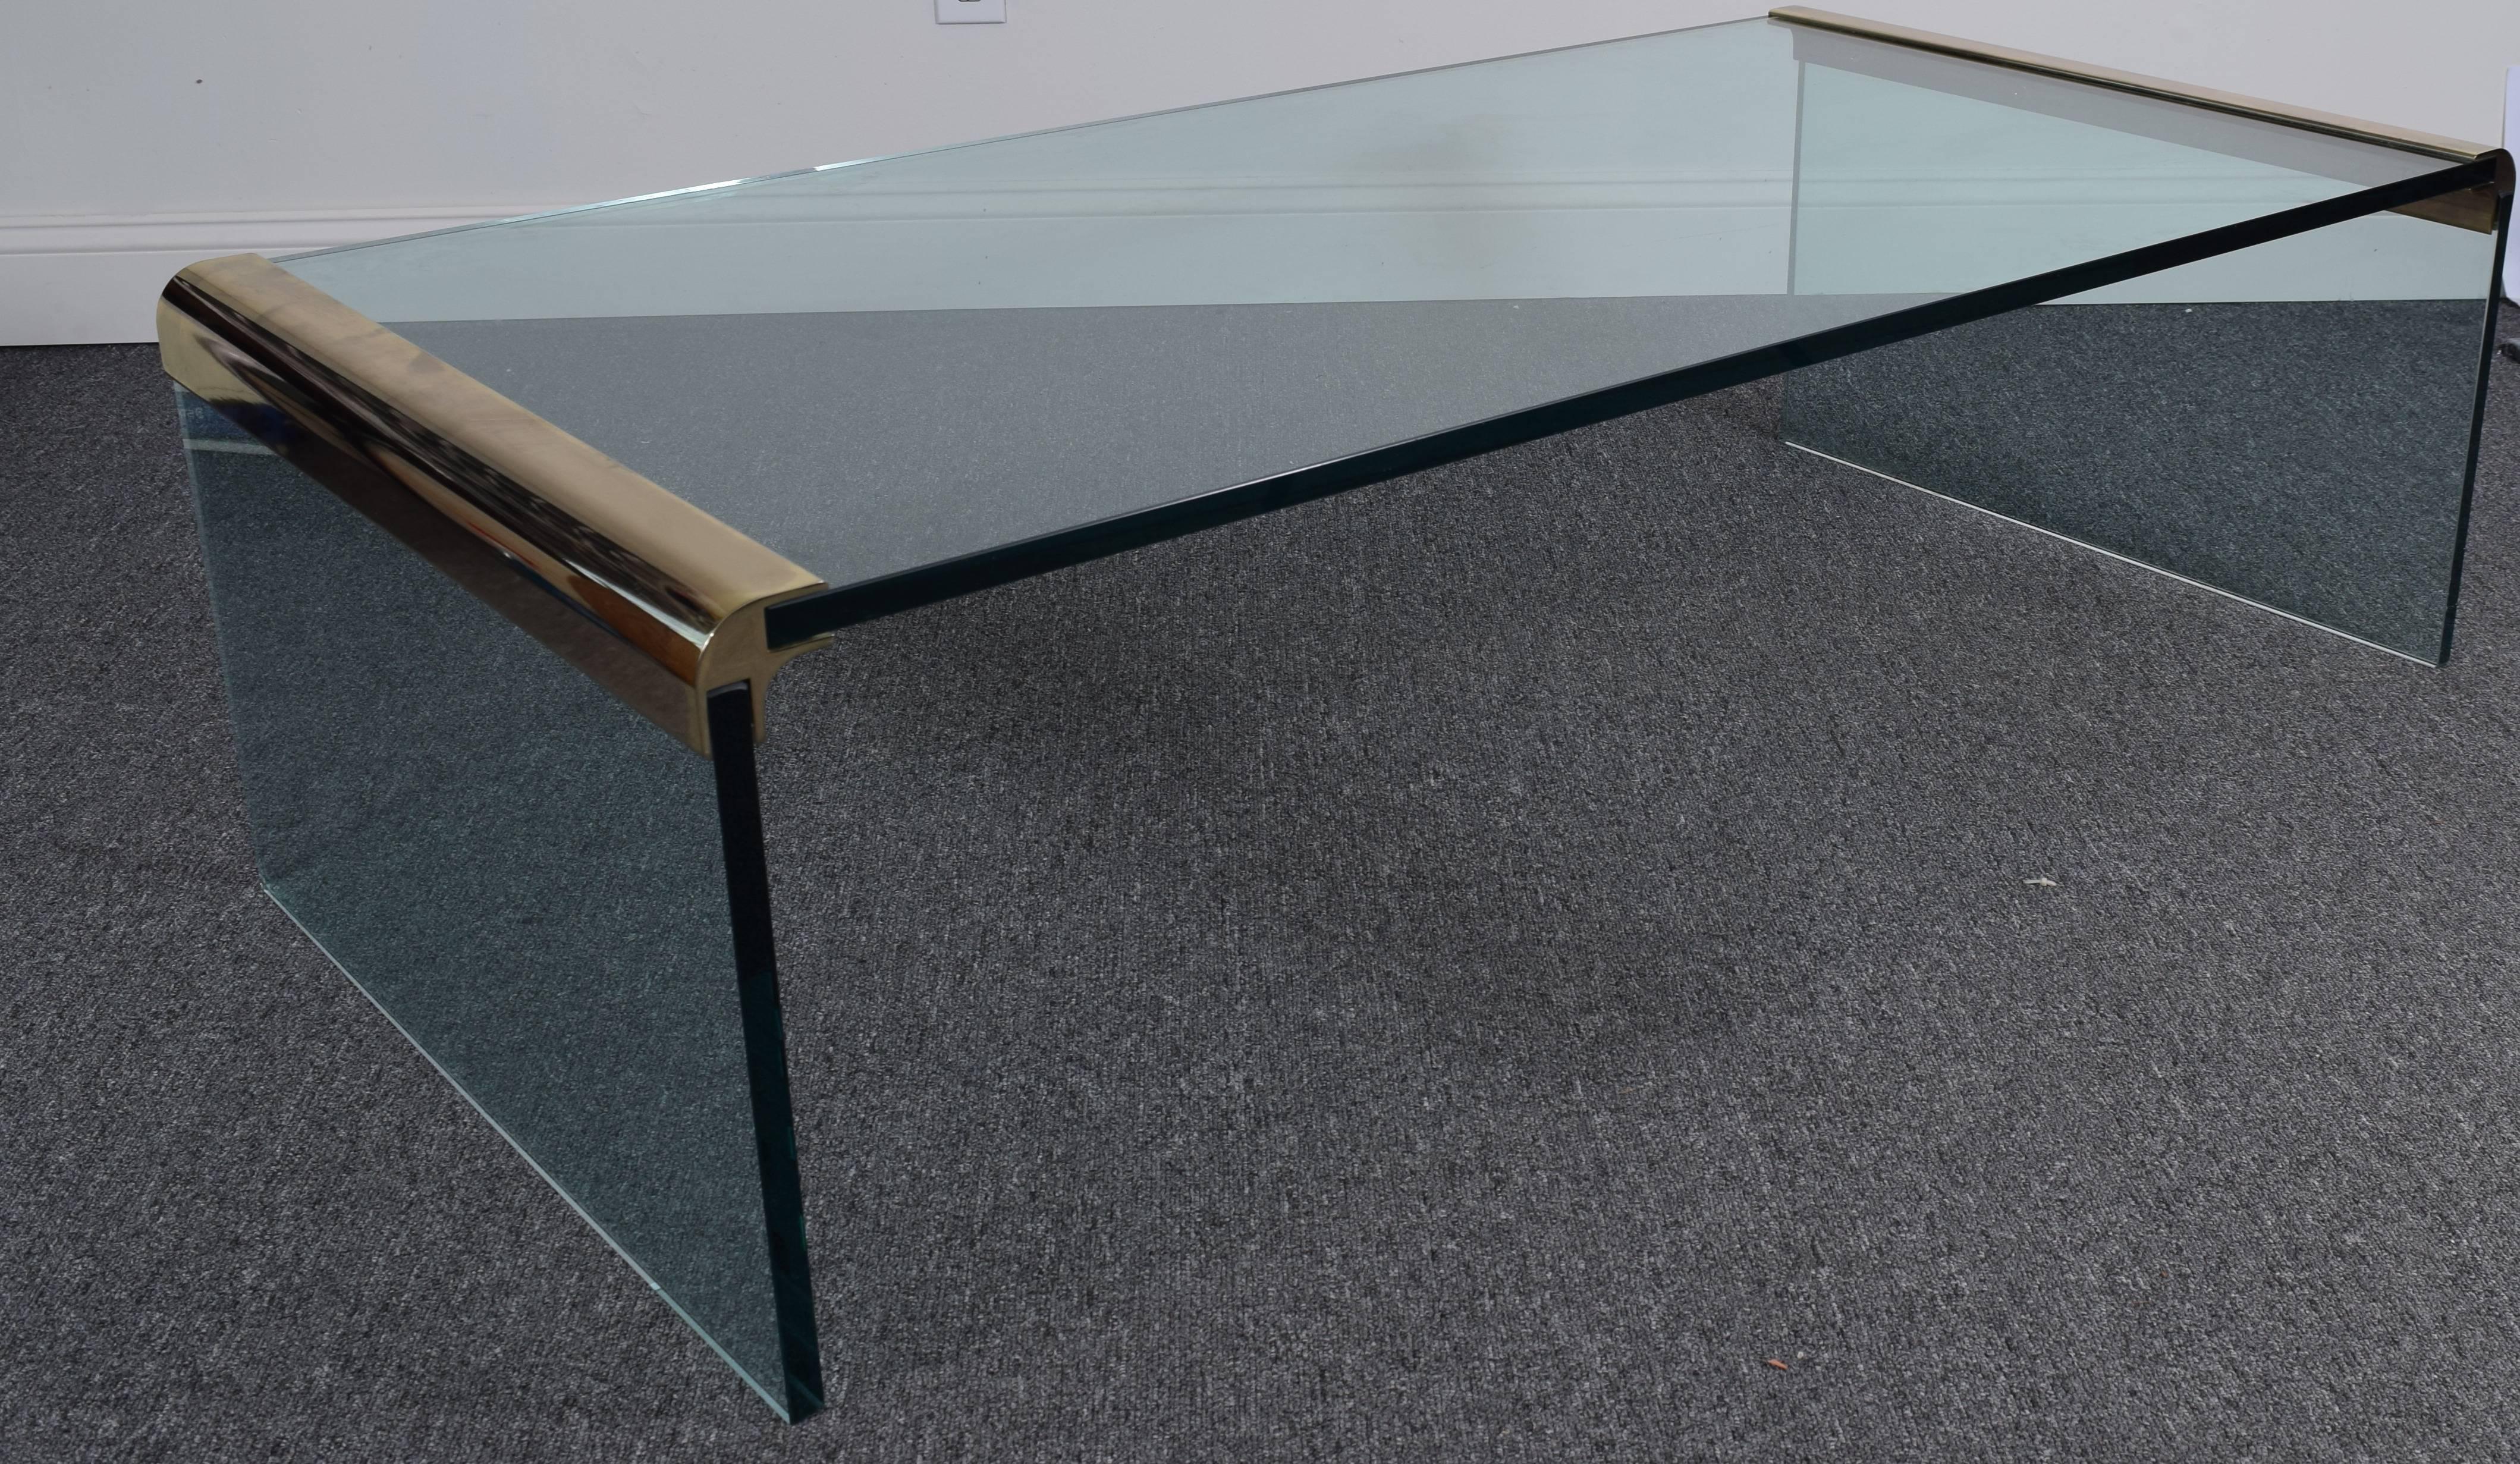 Store closing-- last day is 7/31. Offers welcome! Crisply tailored low table in thick, tinted glass with brass brackets. Signature Pace collection style in dramatic proportions. Exquisite.